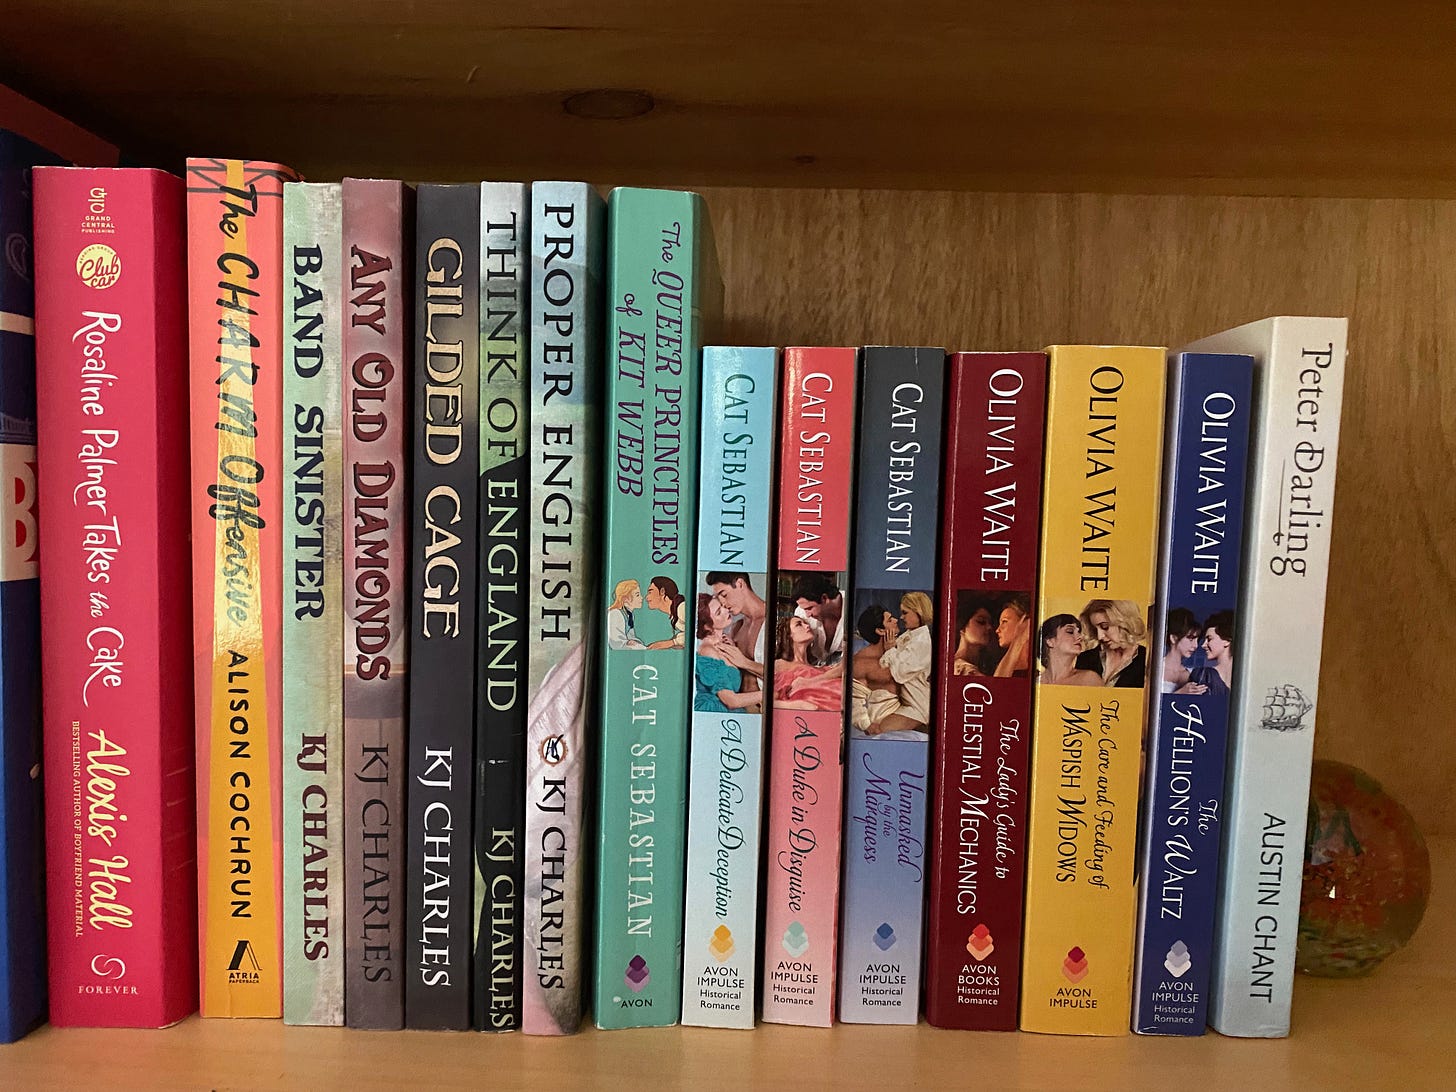 A close-up of a shelf of queer romance novels, trade paperbacks and mass markets. The books are: Rosaline Palmer Takes the Cake by Alexis Hall, The Charm Offensive by Allison Cochrun, Band Sinister, Any Old Diamonds, Gilded Cage, Think of England, and Proper English by KJ Charles, The Queer Principles of Kit Webb, A Deliciate Deception, A Duke in Disguise, and Unmasked by the Marquess by Cat Sebastian, the Feminine Pursuits trilogy by Olivia Waite, and Peter Darling by Austin Chant.